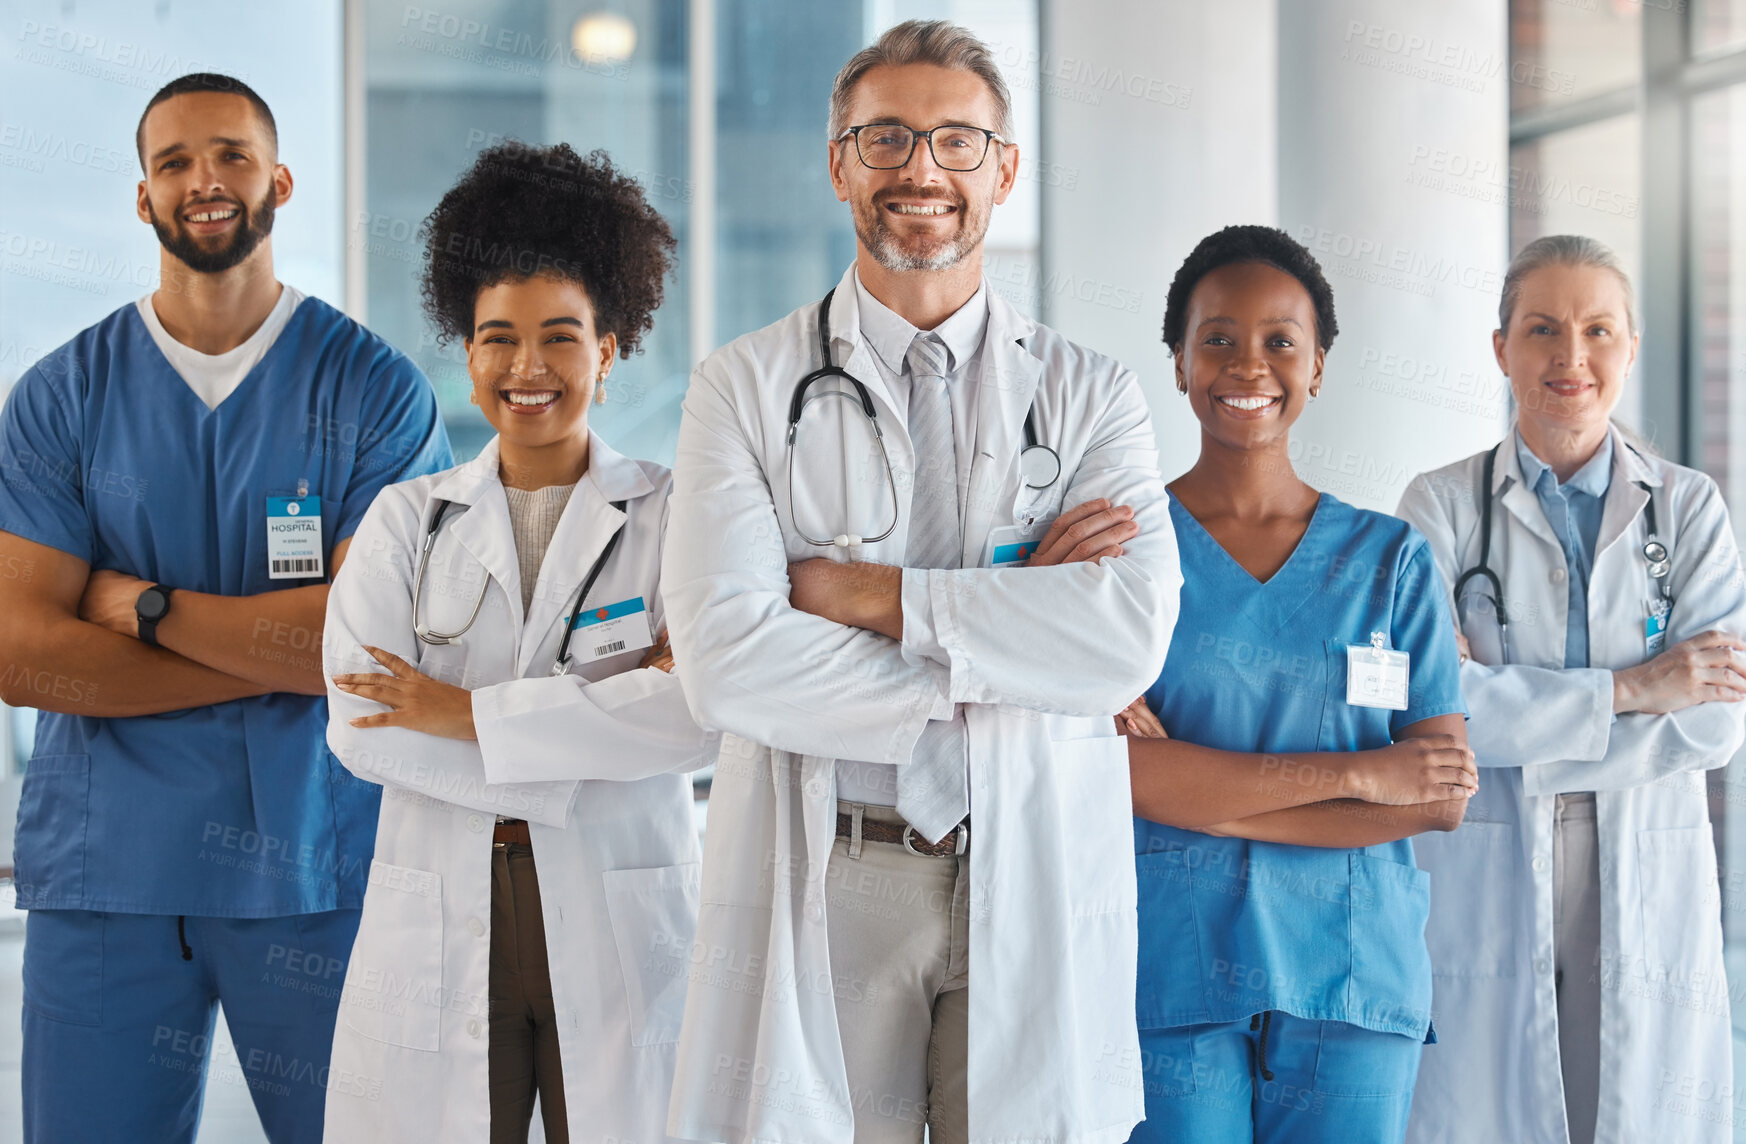 Buy stock photo Doctor, team and hospital at work smile together for portrait in medical facility. Medic, nurse and healthcare in clinic with workers showing happiness, confidence and diversity for teamwork in Miami